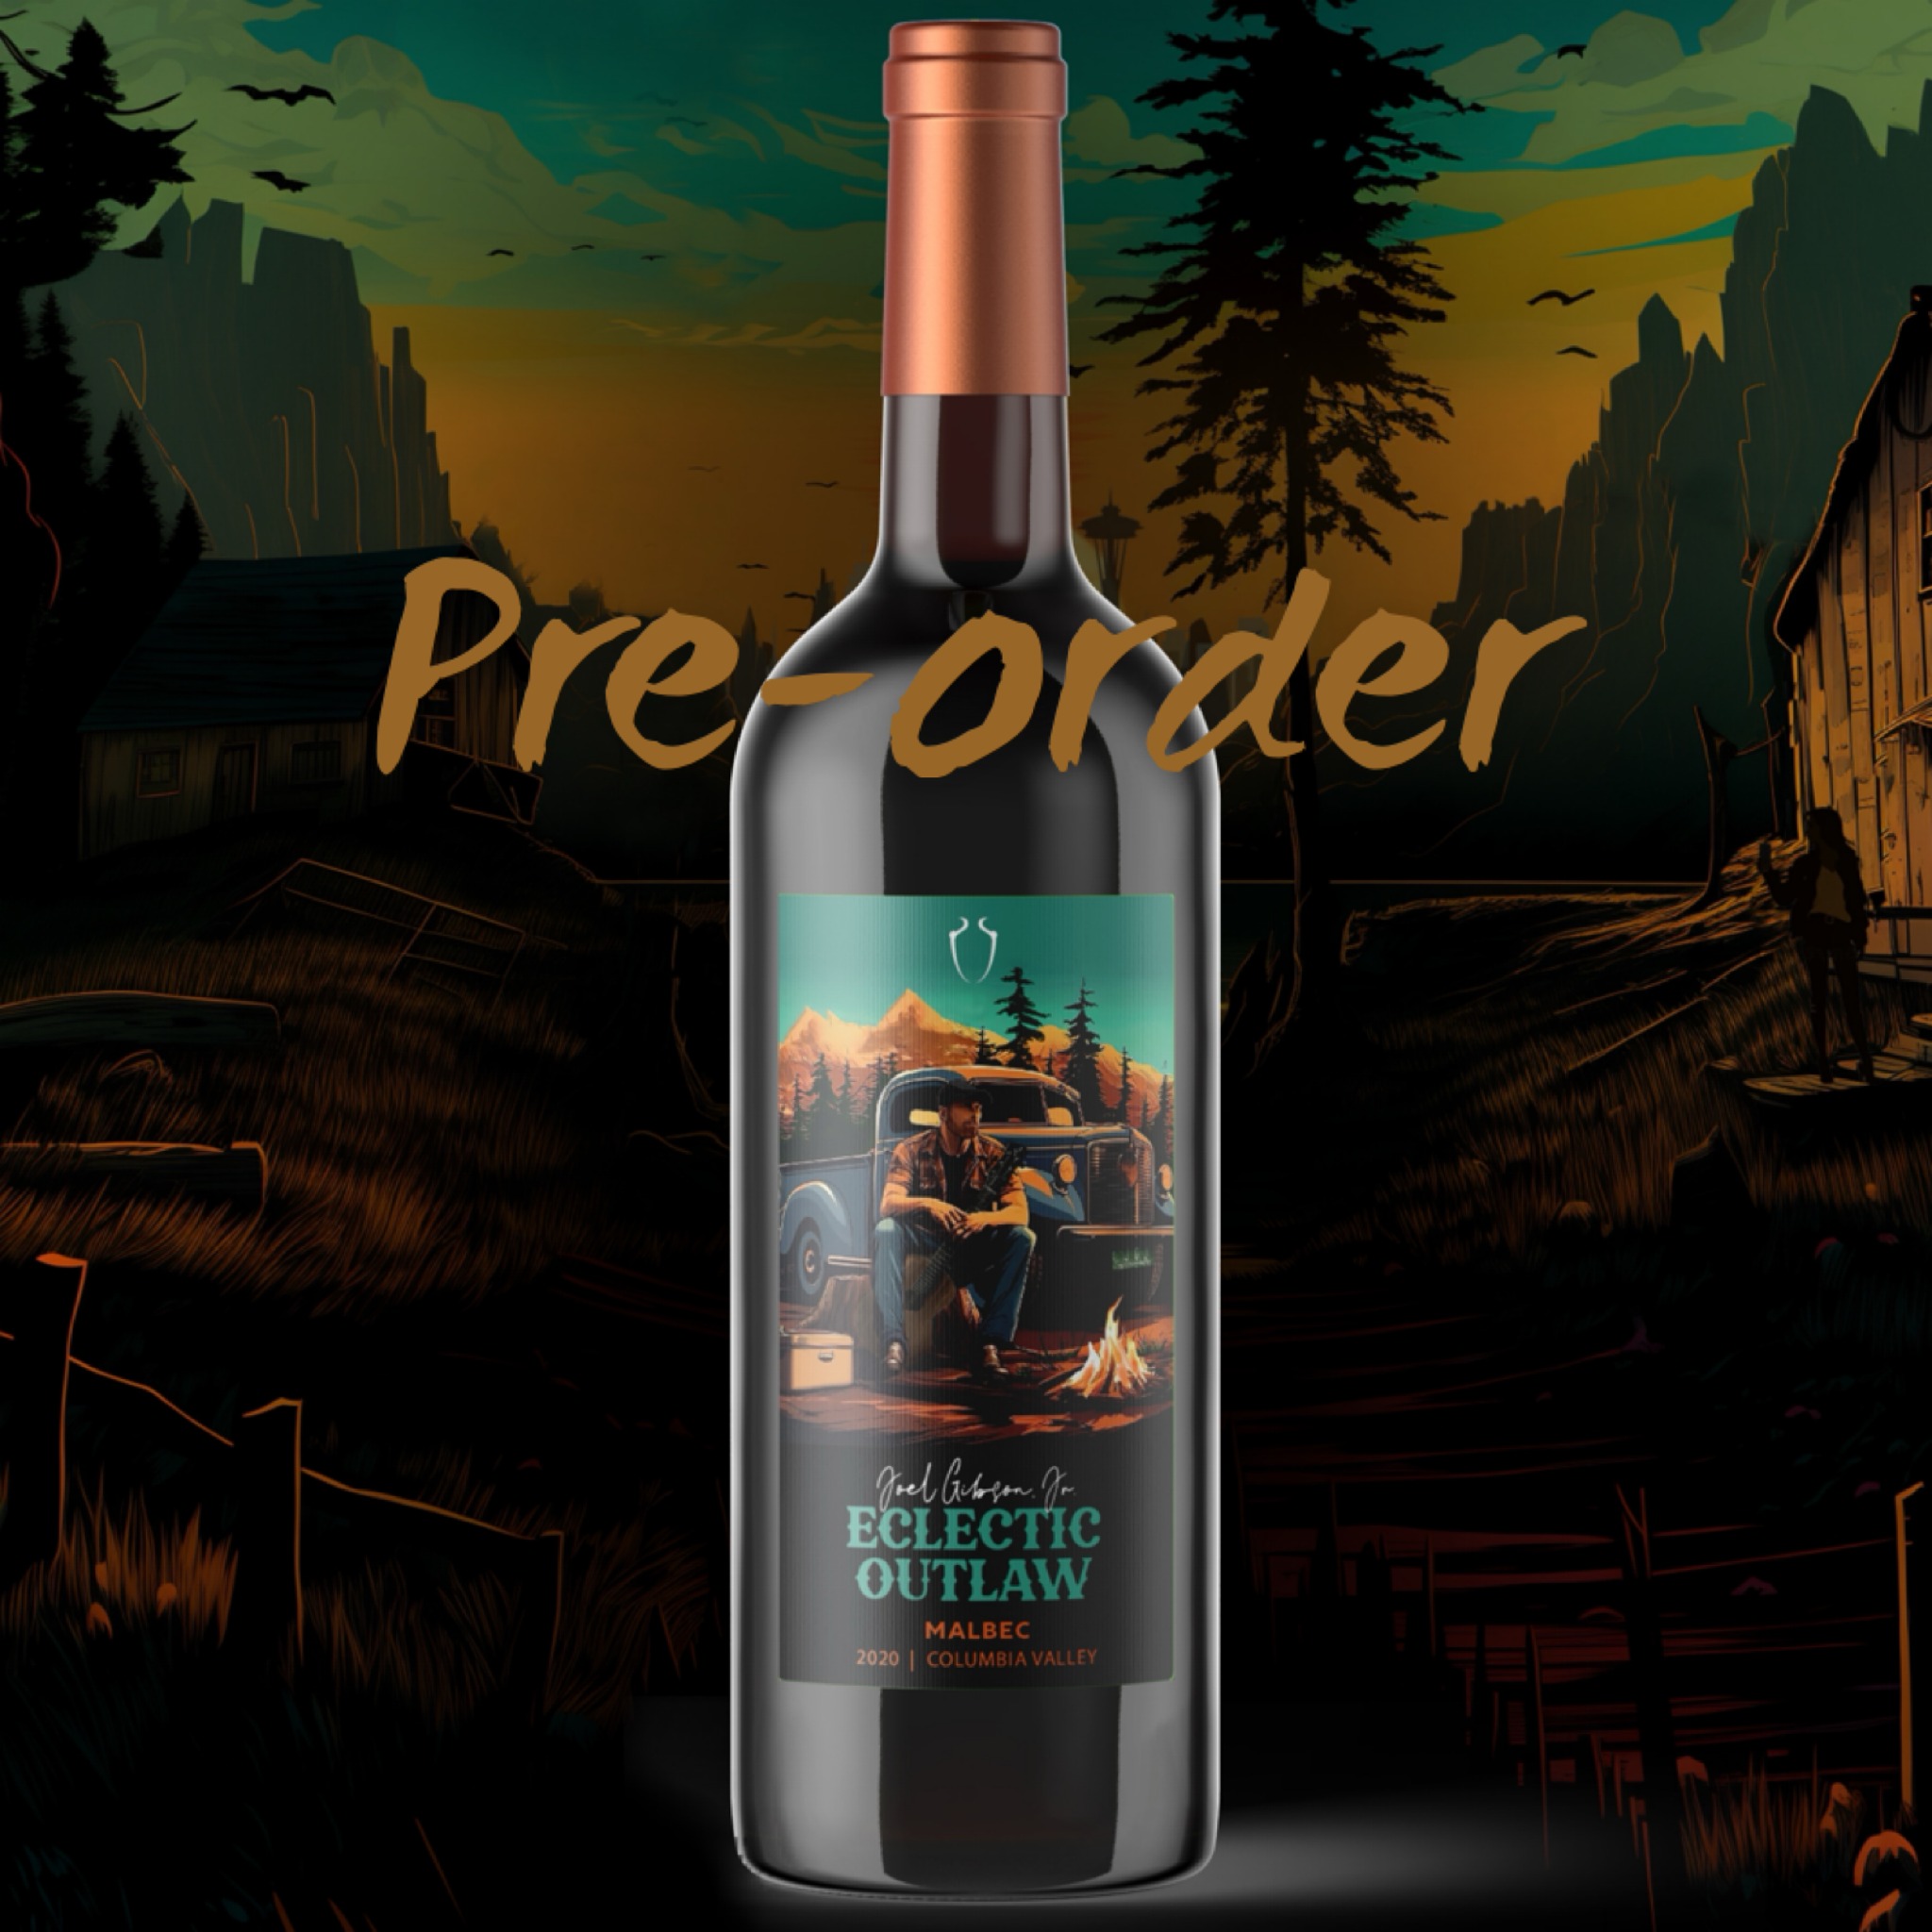 Product Image for 2020 Eclectic Outlaw Malbec